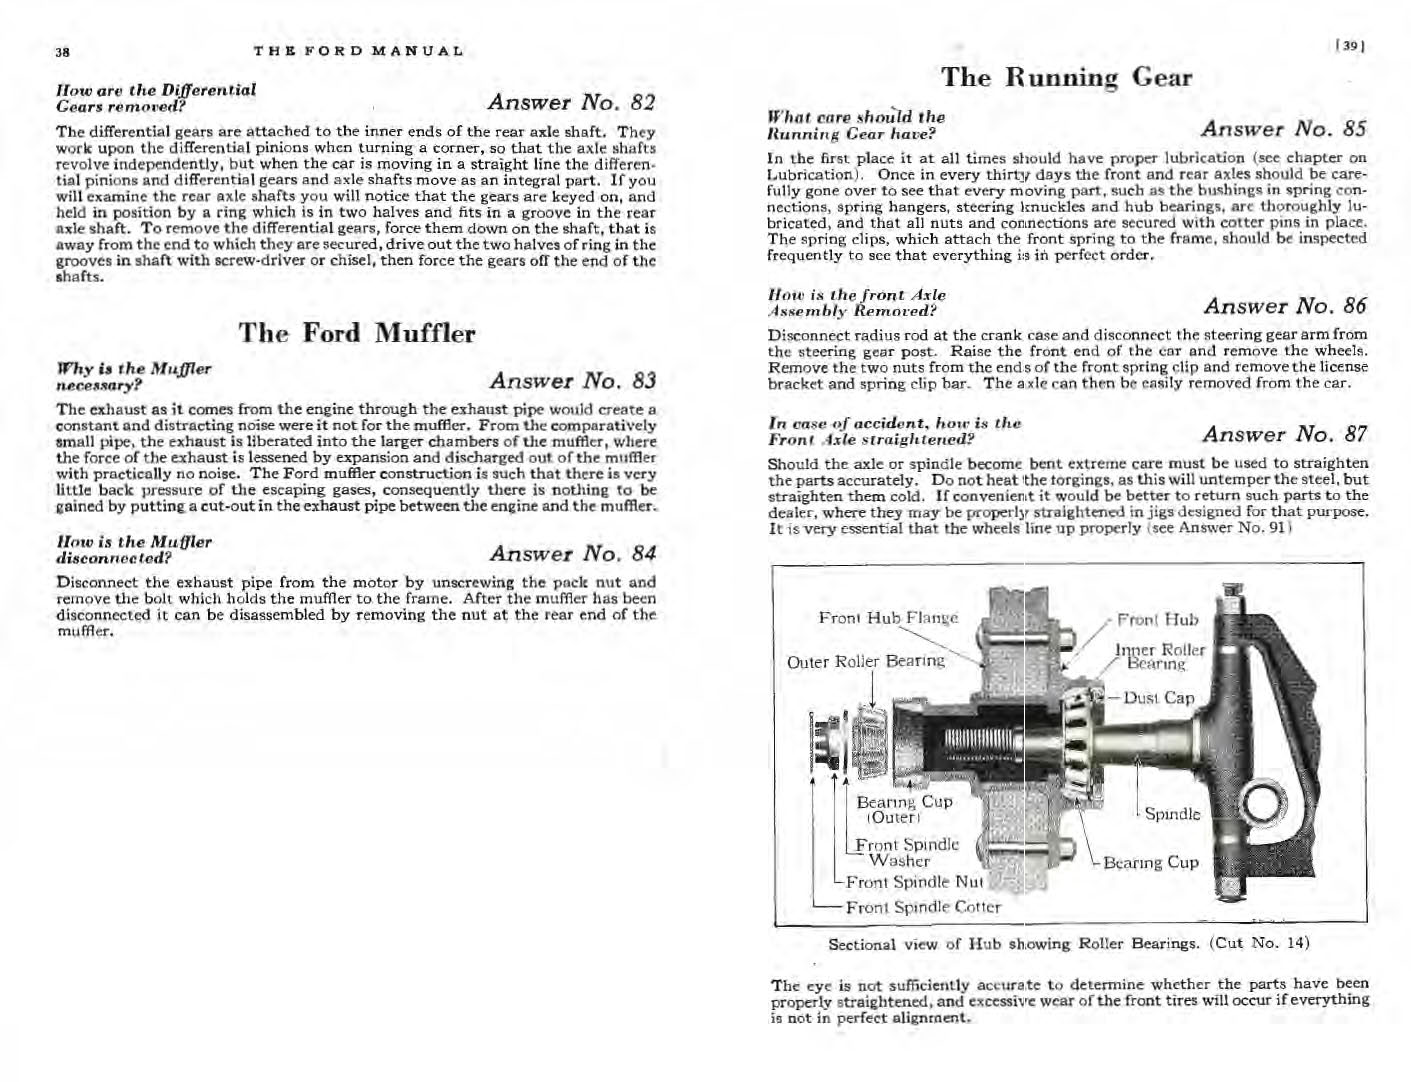 1926_Ford_Owners_Manual-38-39